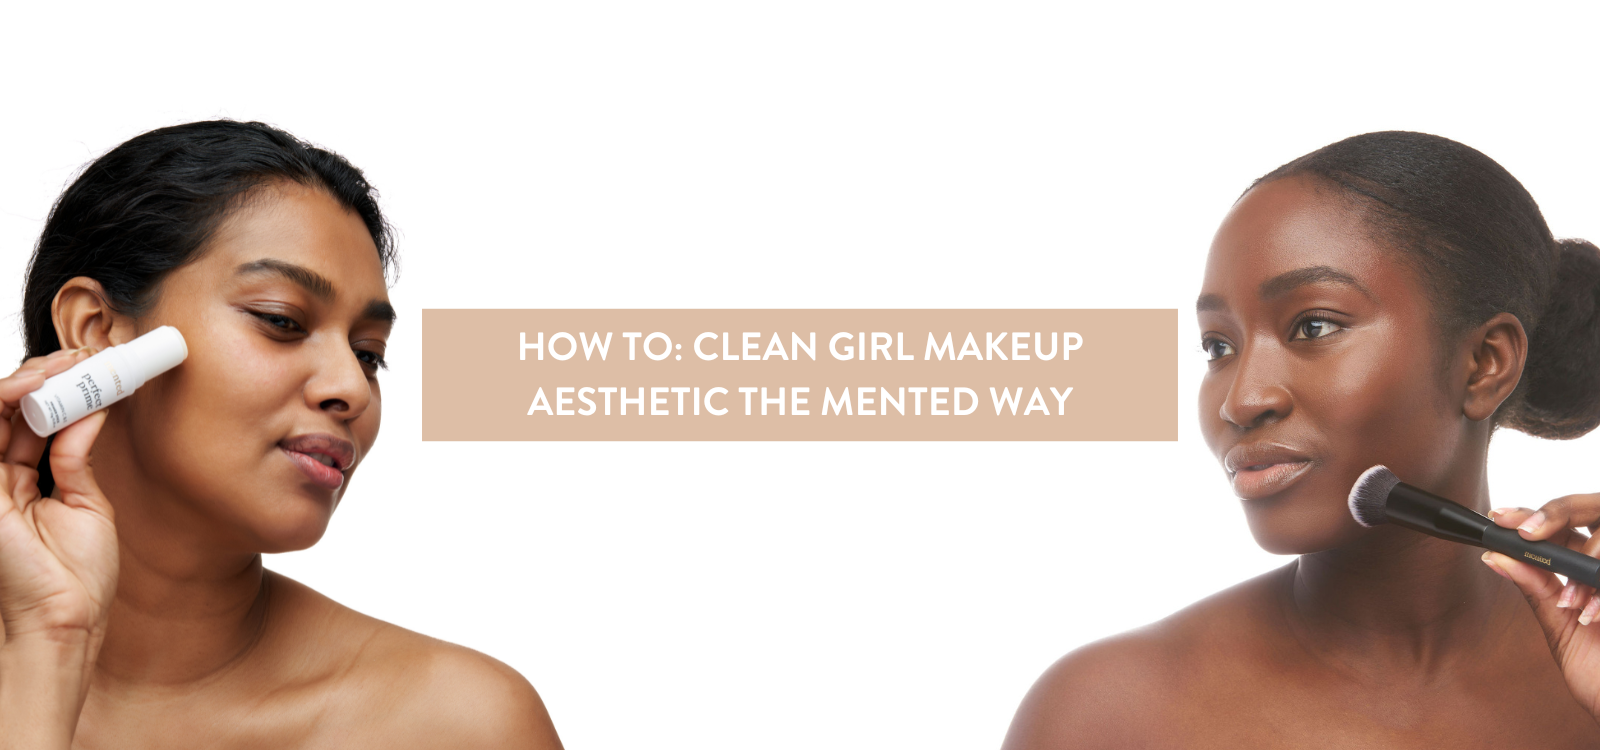 How To: Clean Girl Makeup Aesthetic the Mented Way